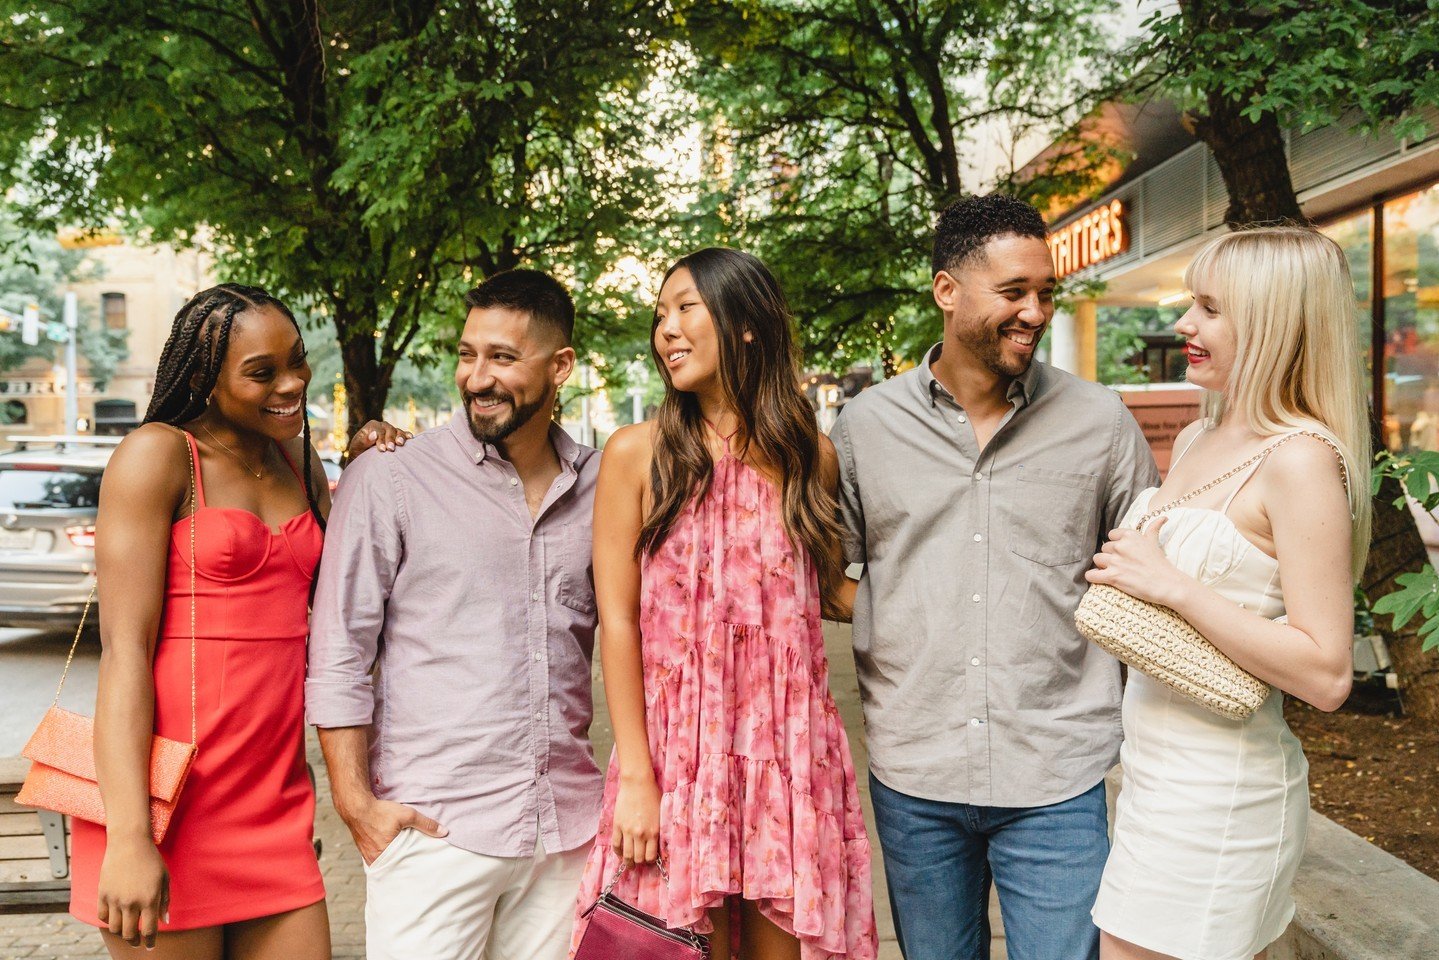 Round up your ride-or-dies!✨ The 2nd Street District is the place to be for an epic day out with your favorite people. From shopping to dining and everything in between, we've got you covered. Tag your crew!🫶